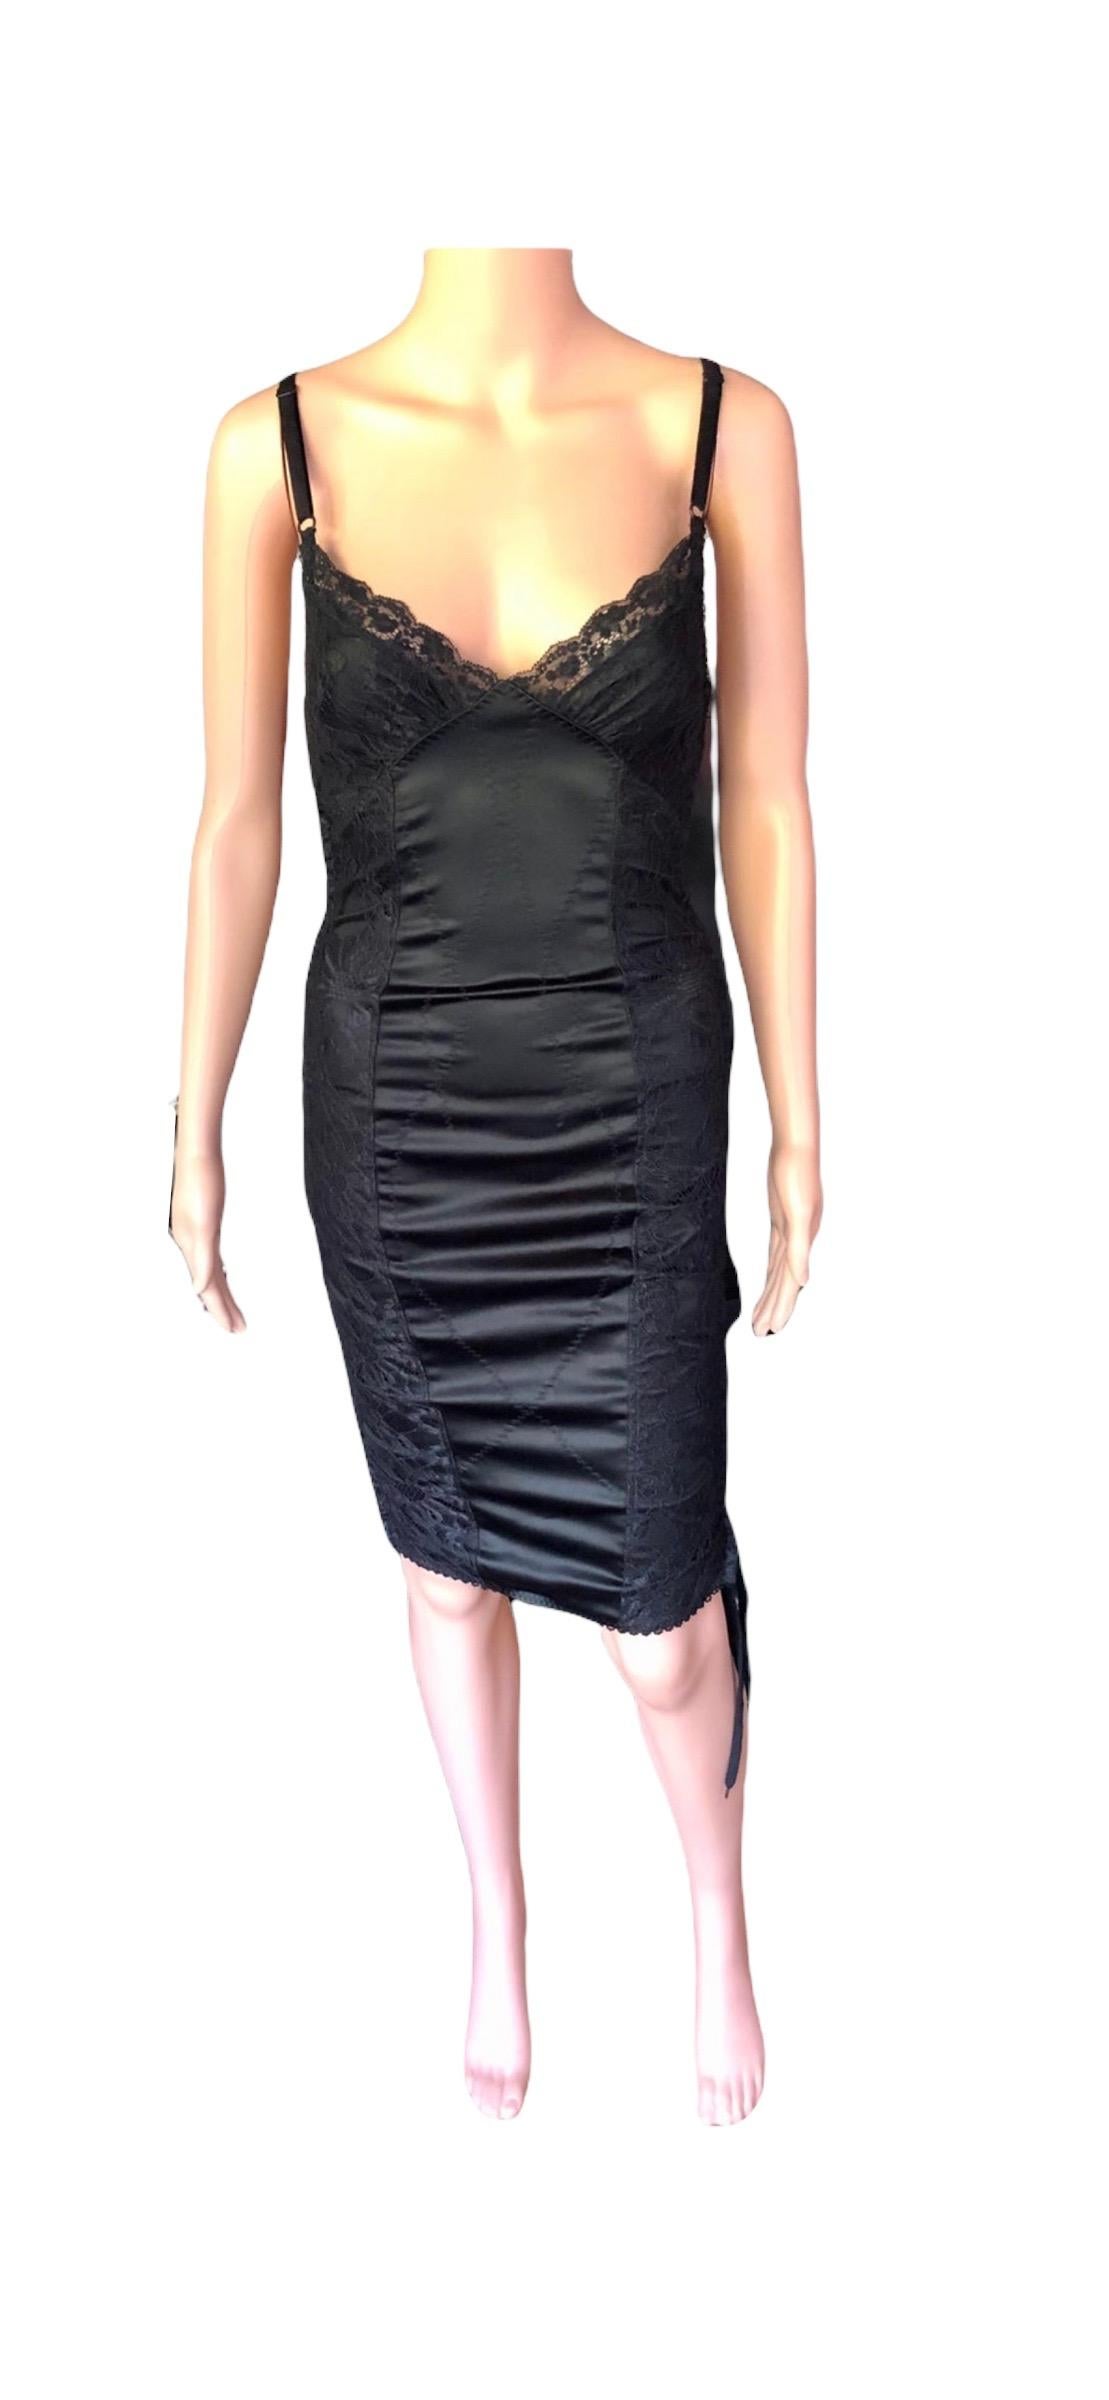 D&G by Dolce & Gabbana Lace Up Bodycon Black Dress For Sale 10